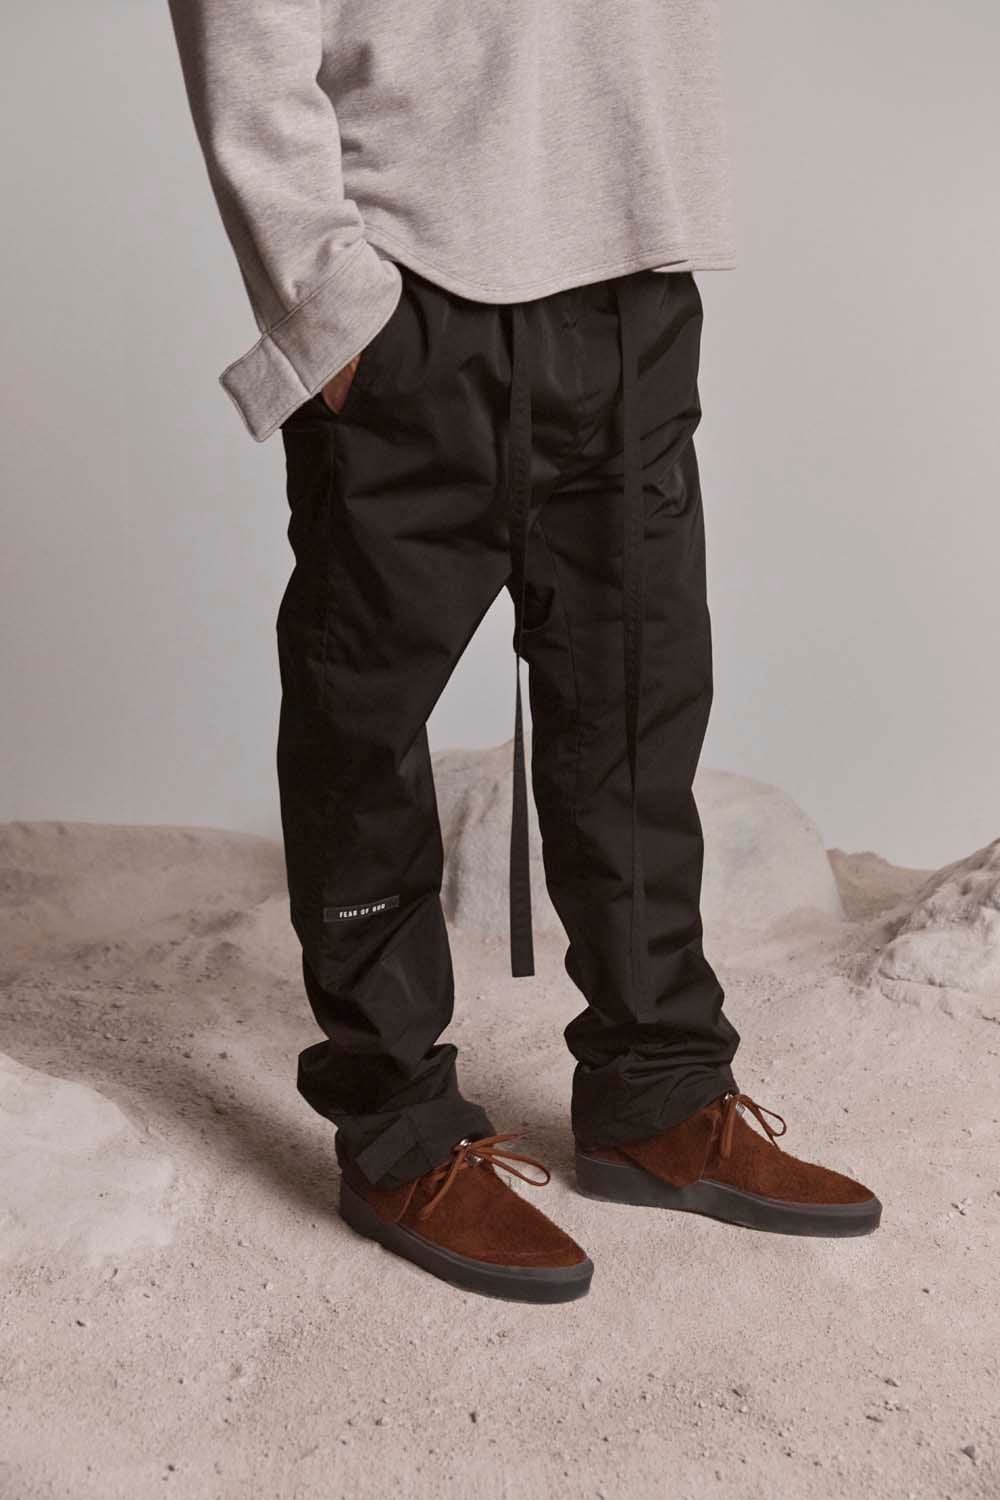 Fear of God 'Sixth Collection' Nylon Cargo Snap Button Pants